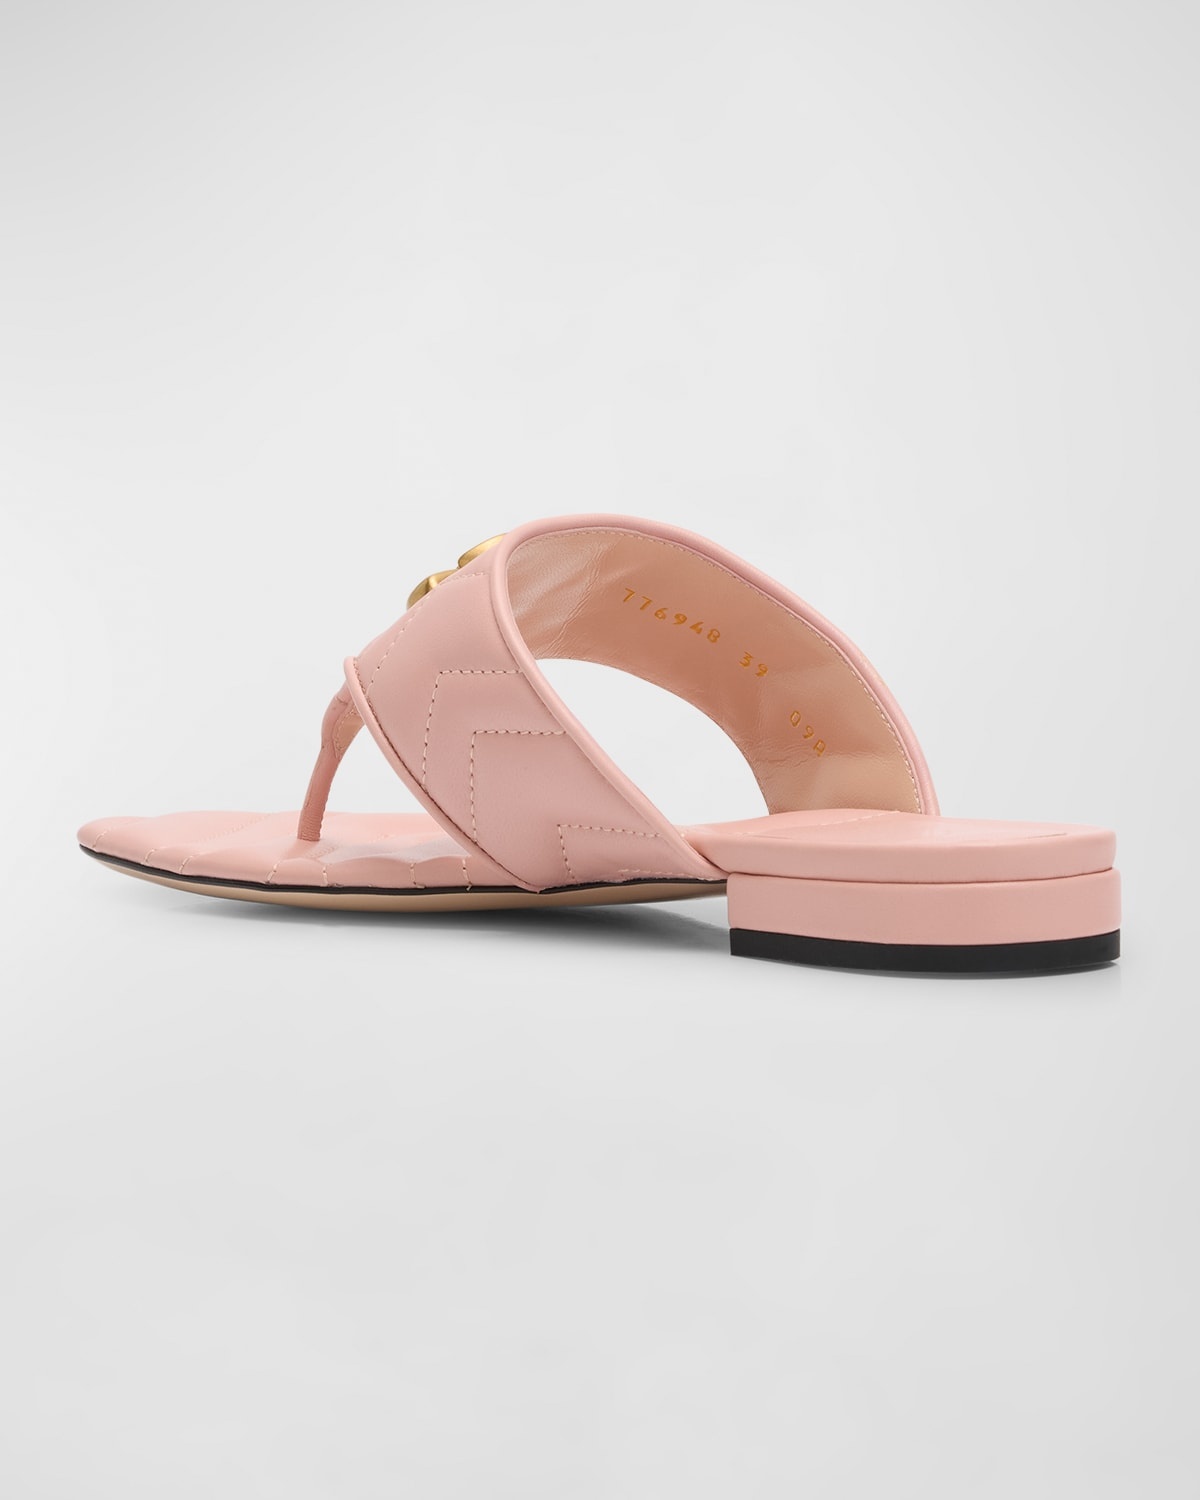 Double G Marmont Thong Sandals - 5